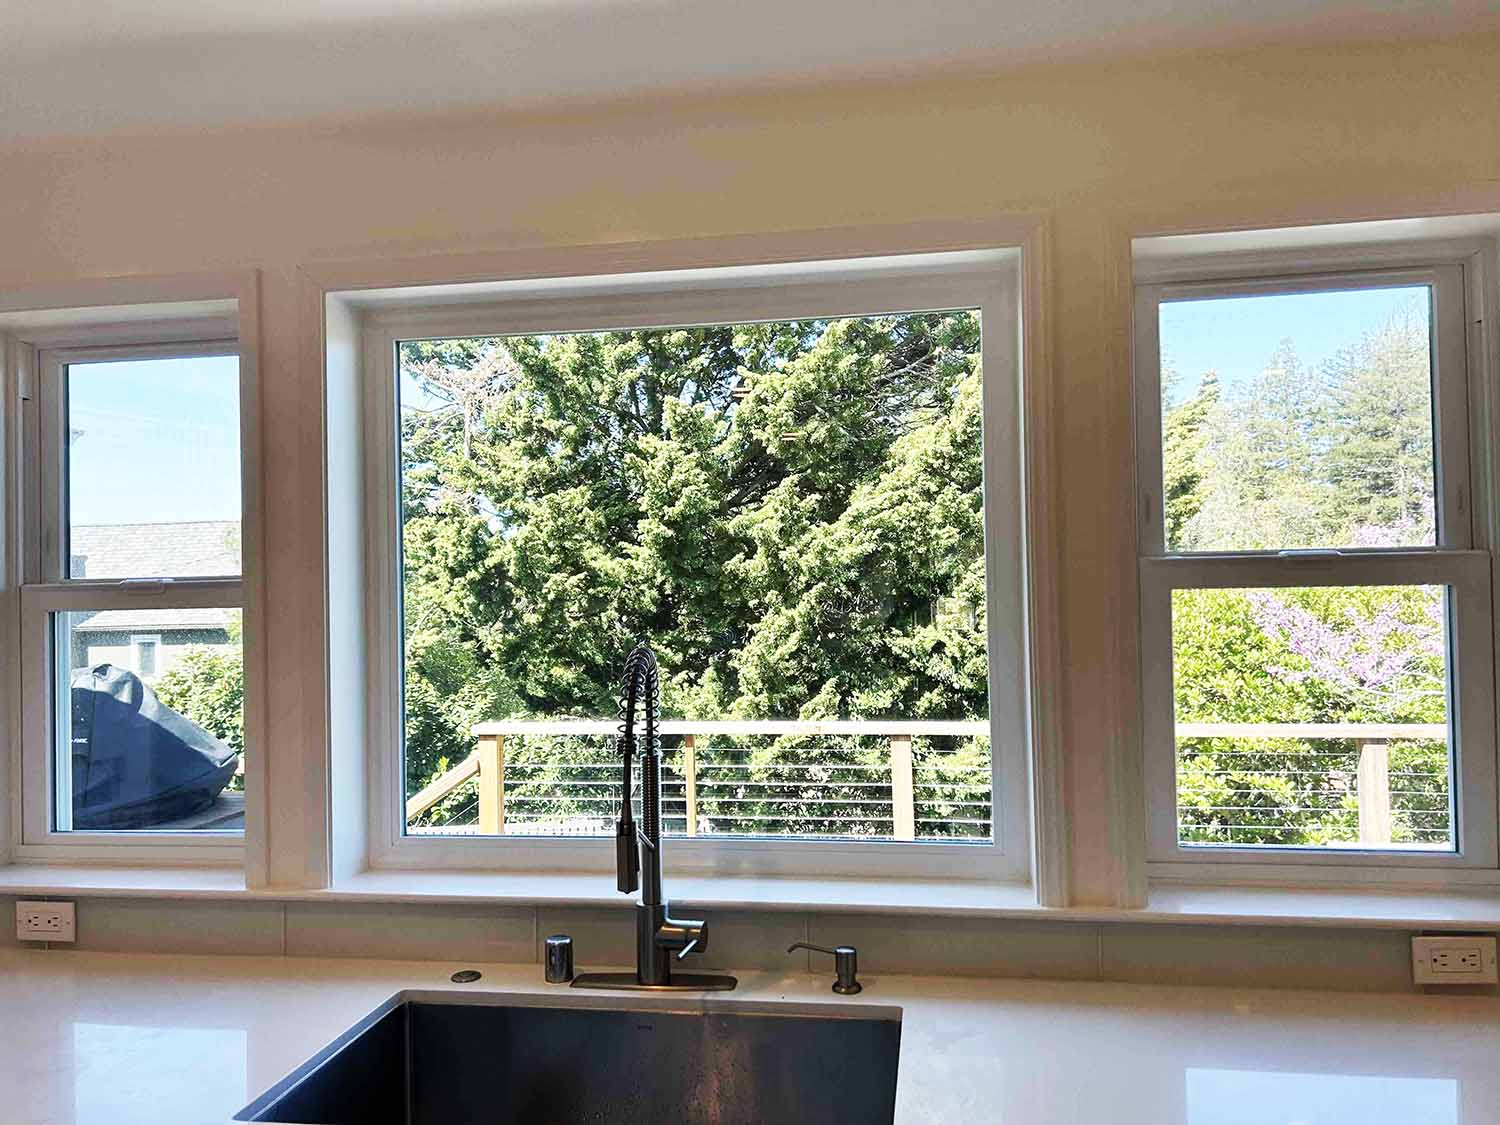 Safety Window Film for Kitchens in Berkeley, CA. Get a free estimate in the San Francisco Bay Area from ClimatePro.